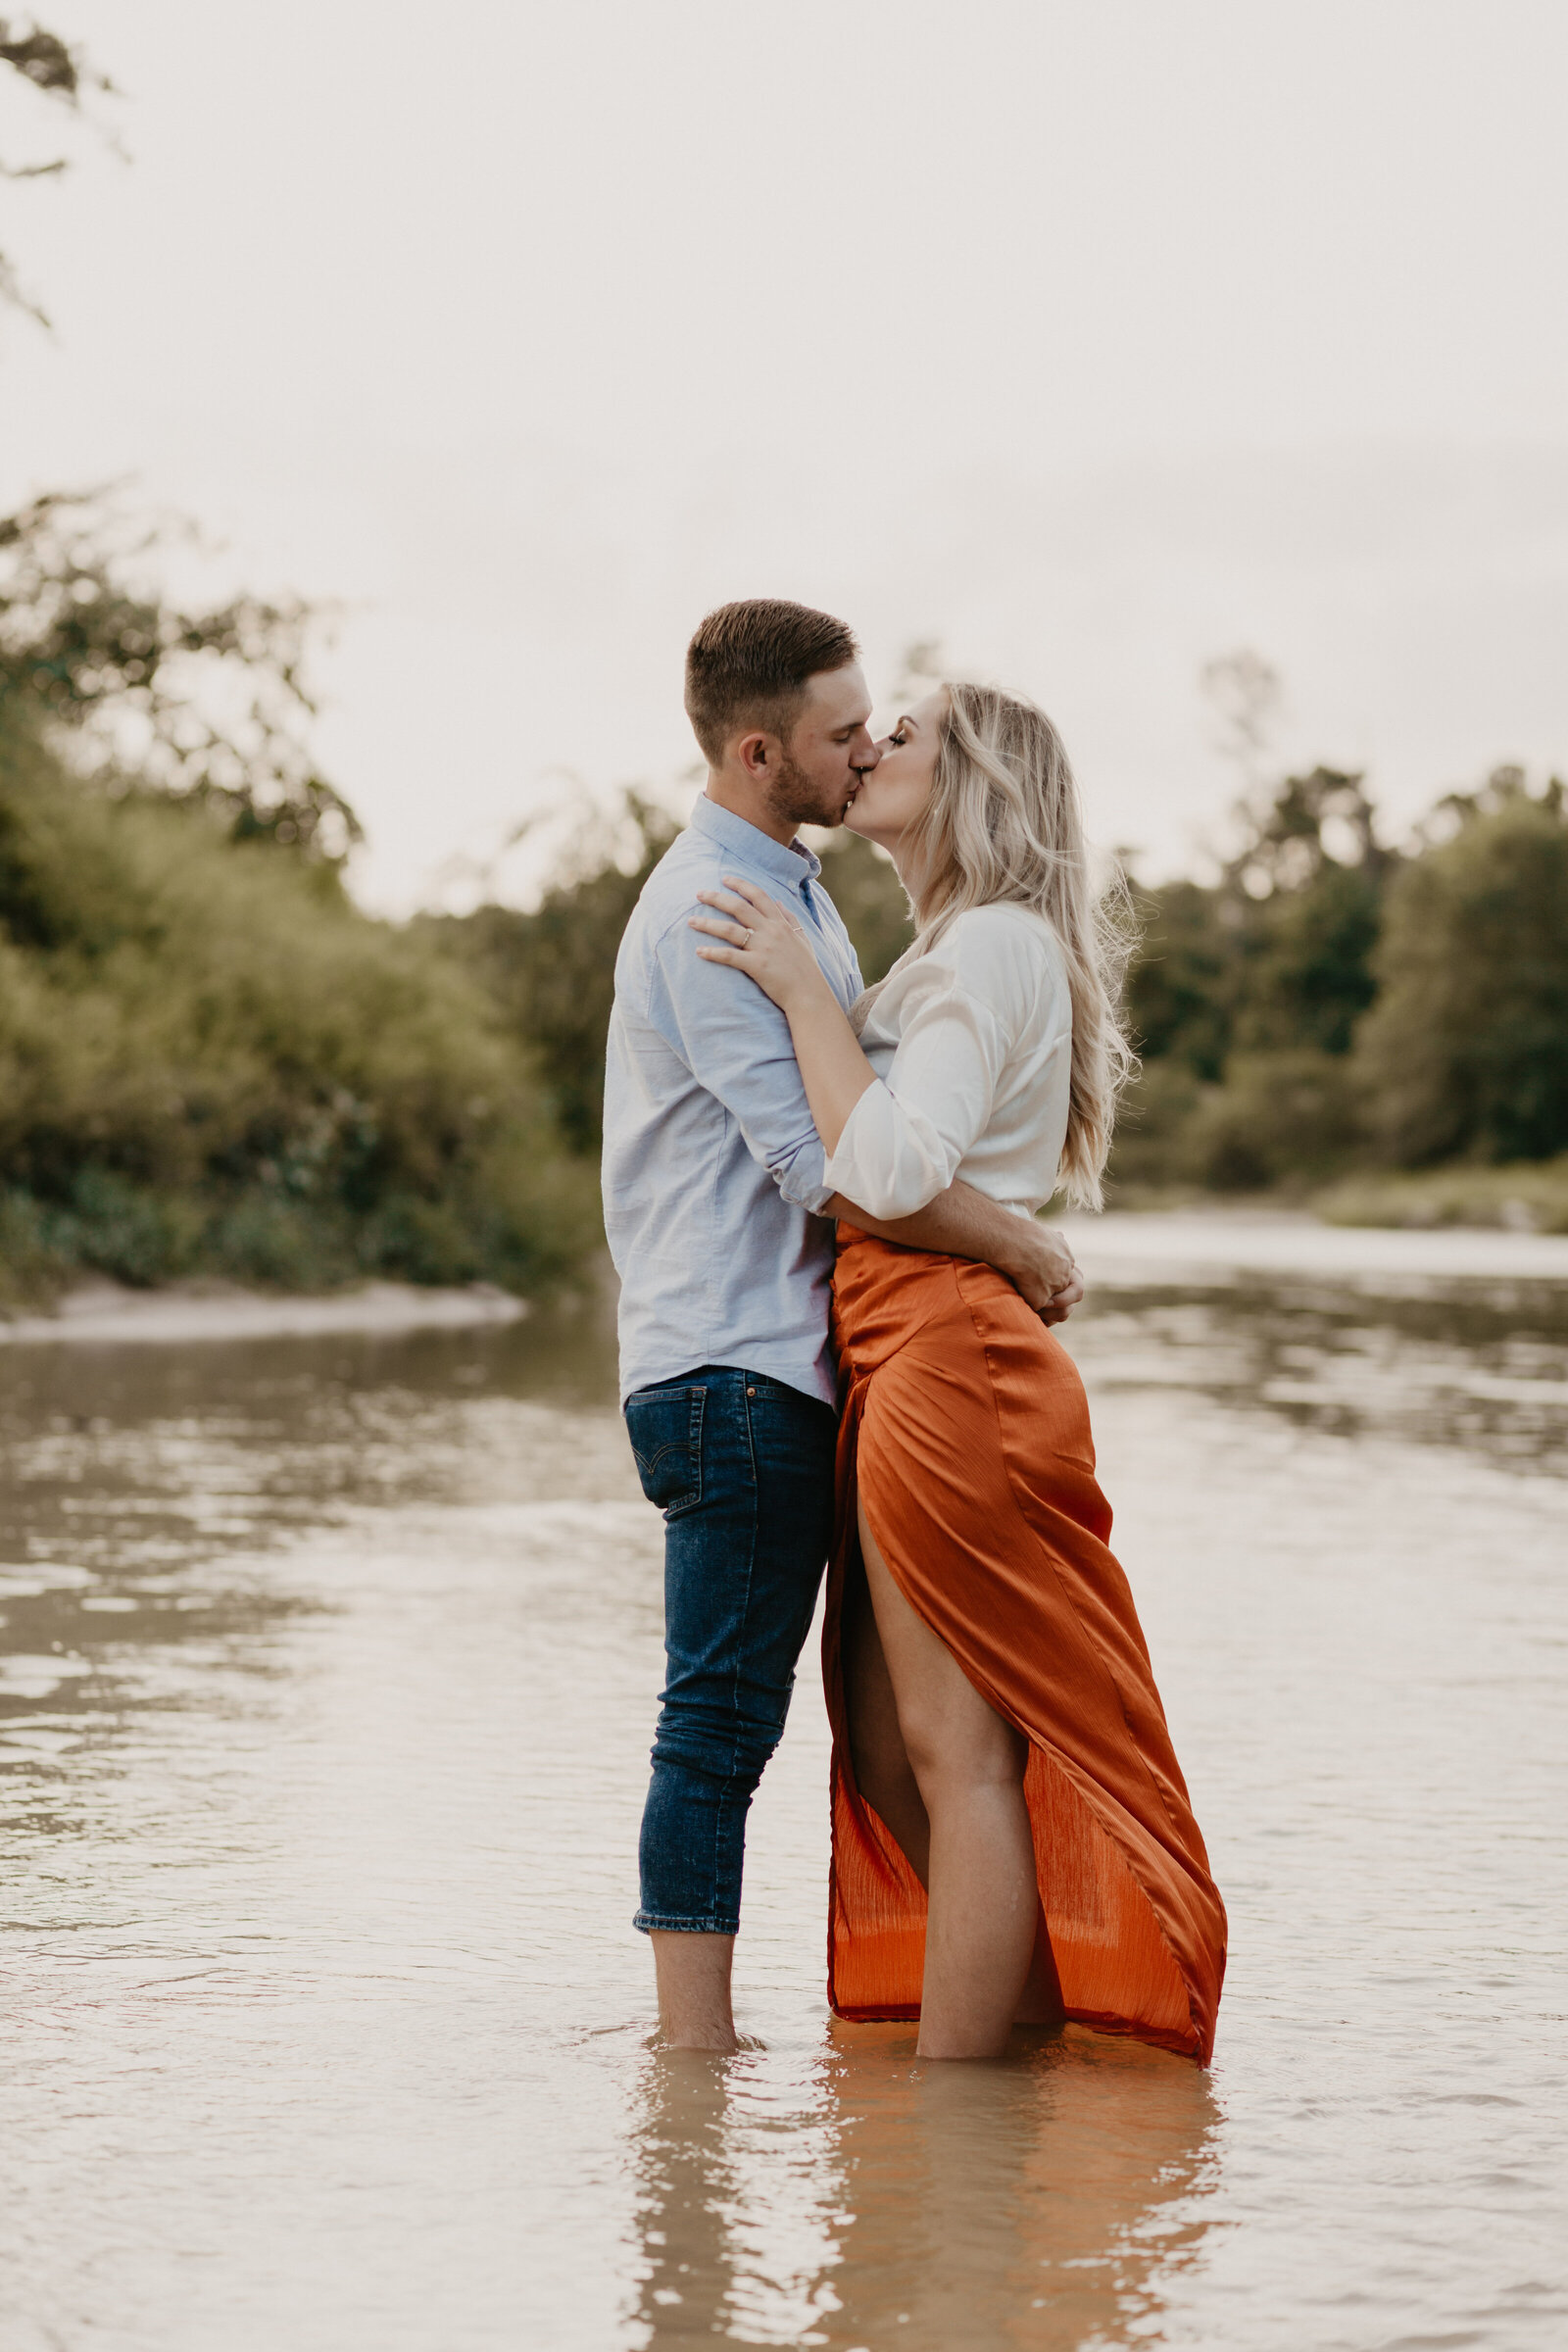 Pundt Park Engagement Session in Spring, Texas